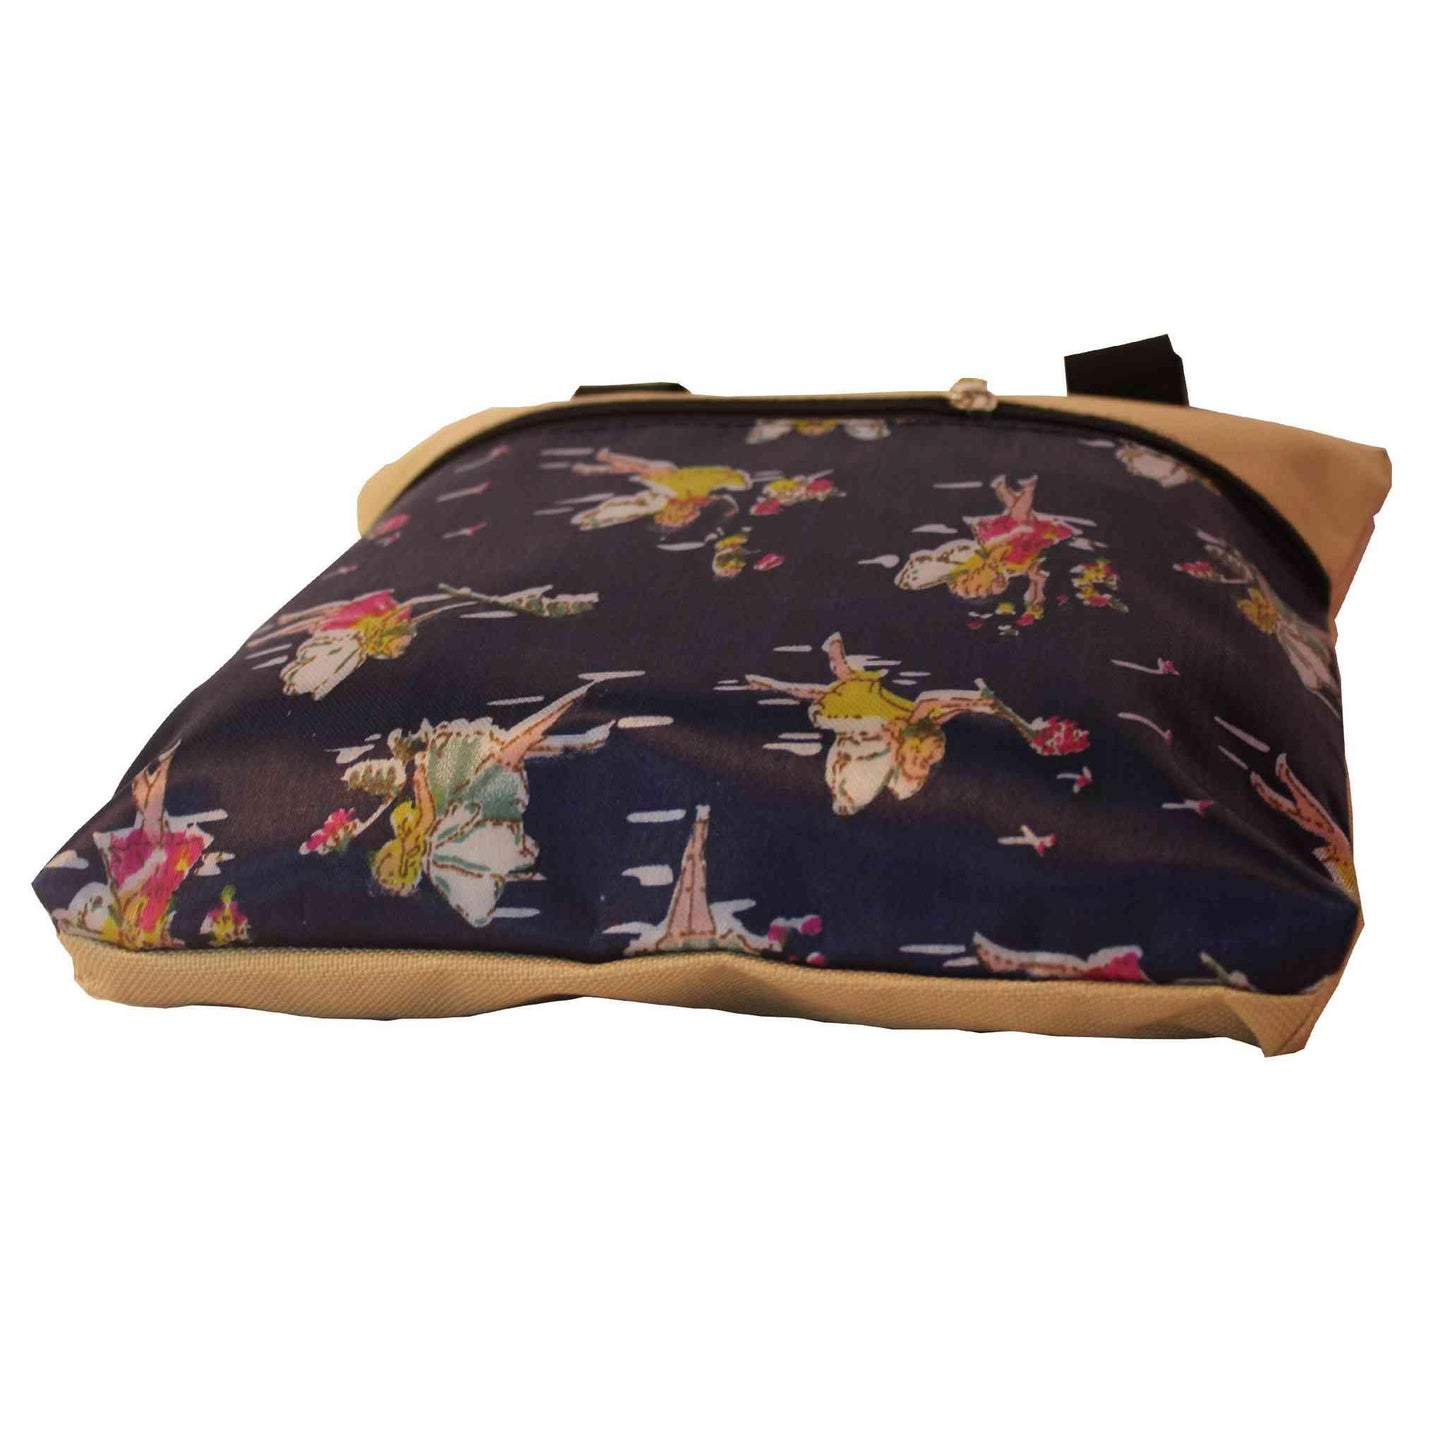 Imported Durable Canvas Printed multi purpose utility Medium size Bag with handles for all occasions for the girls and ladies, Design 1, Brown - Indian Petals